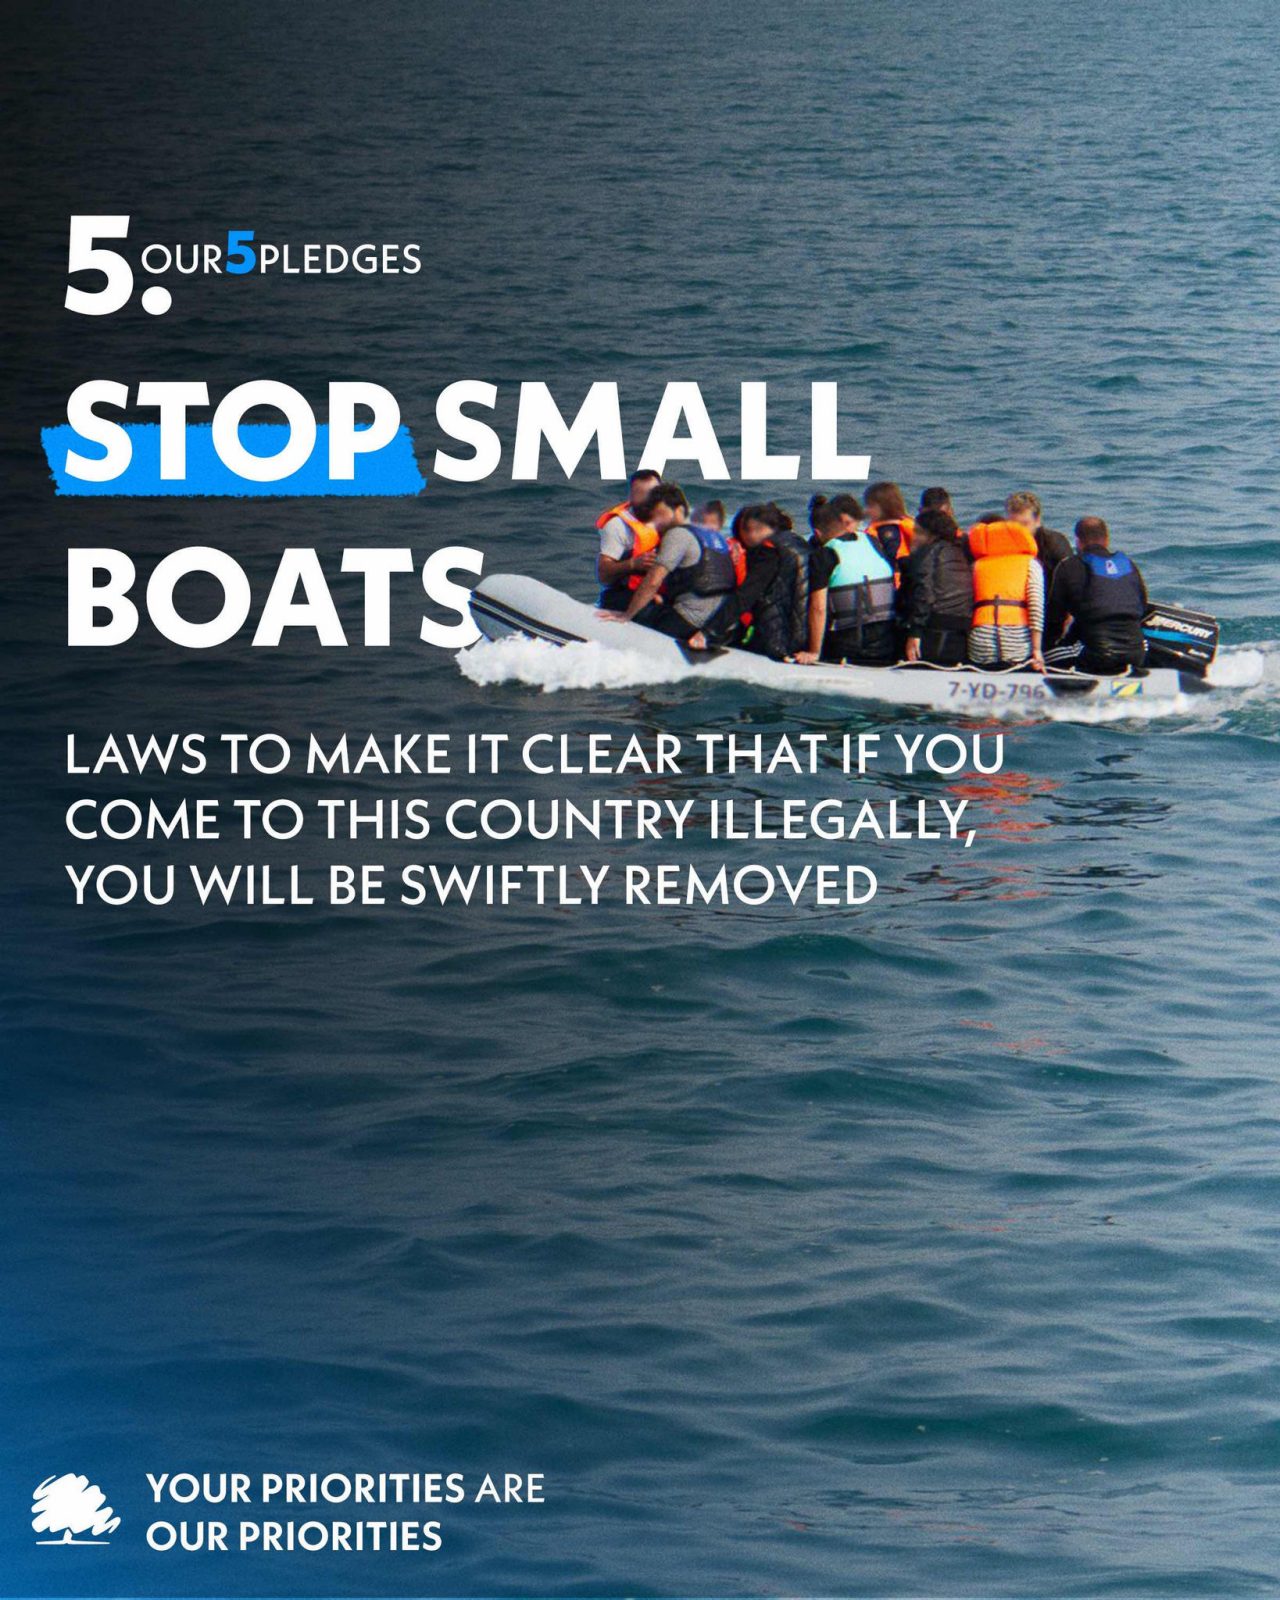 We will stop small boats